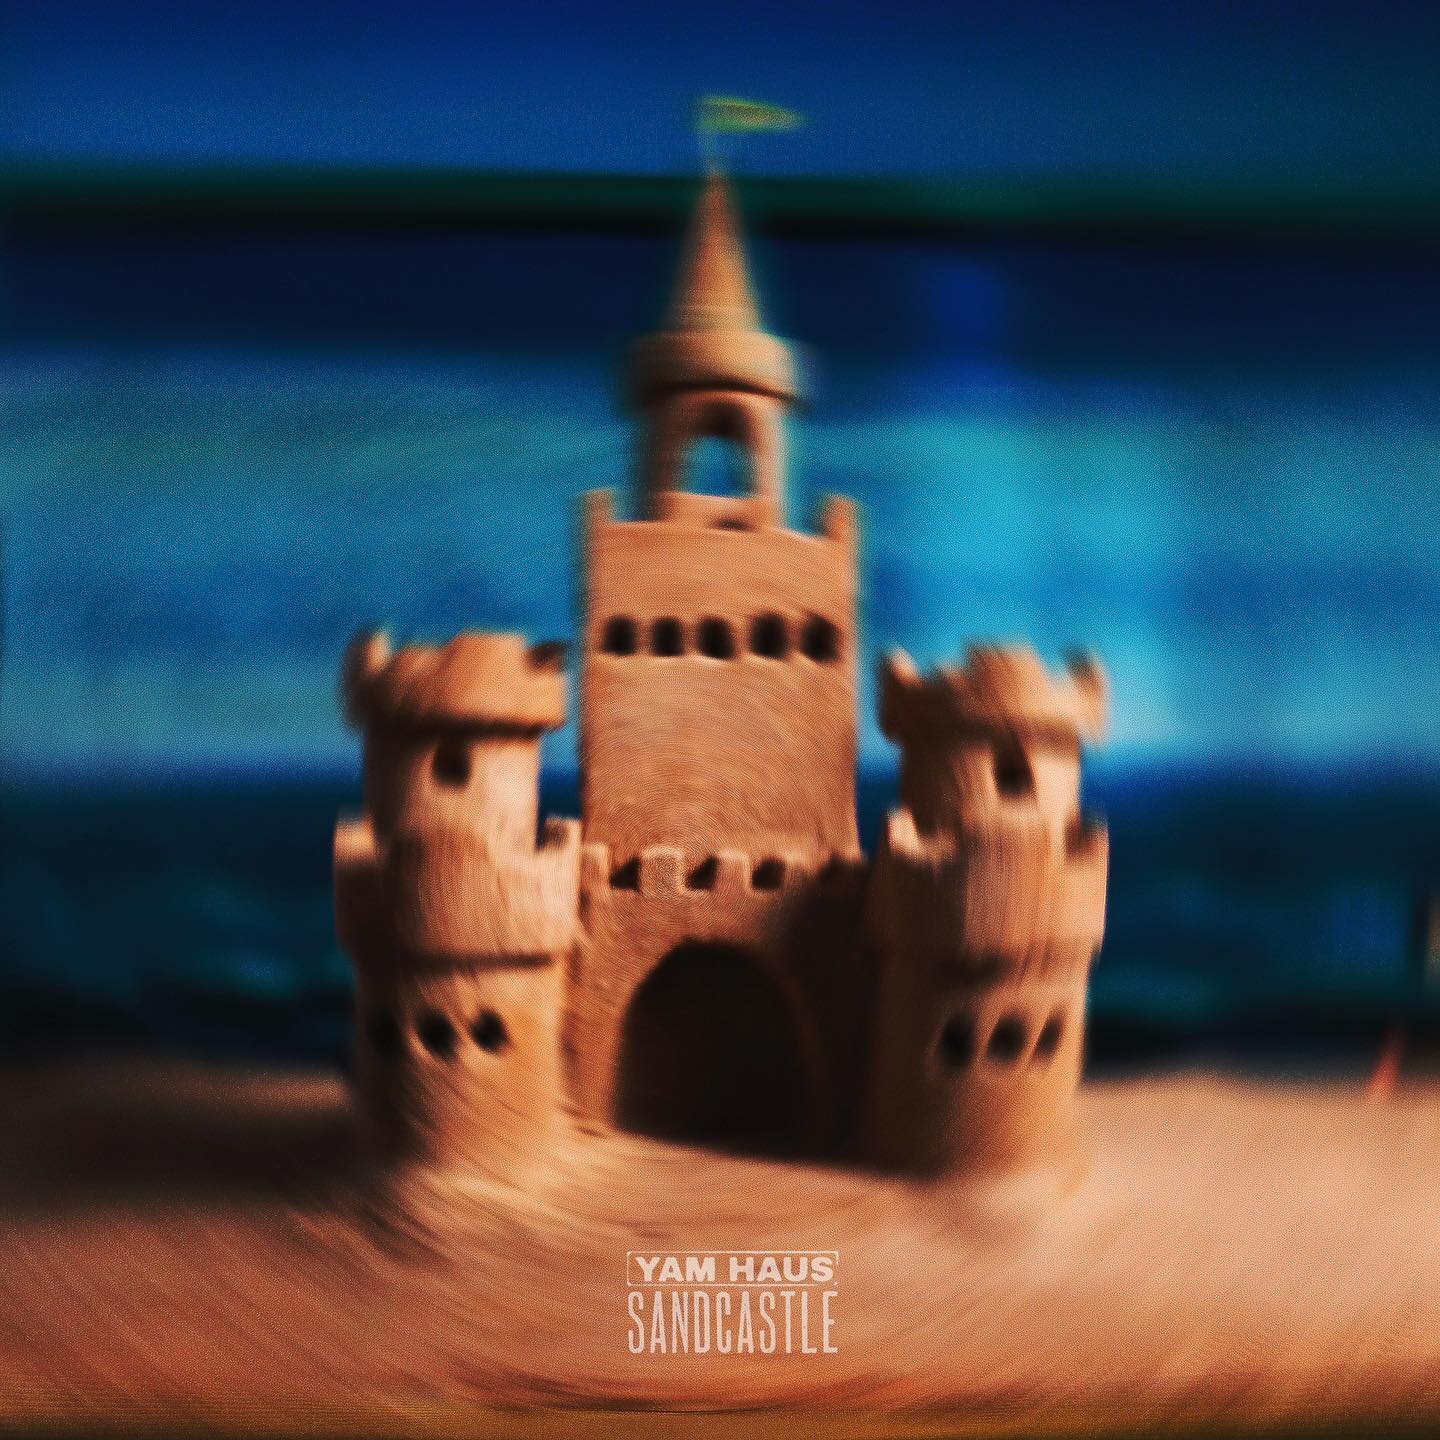 Sandcastle is out now 🏰